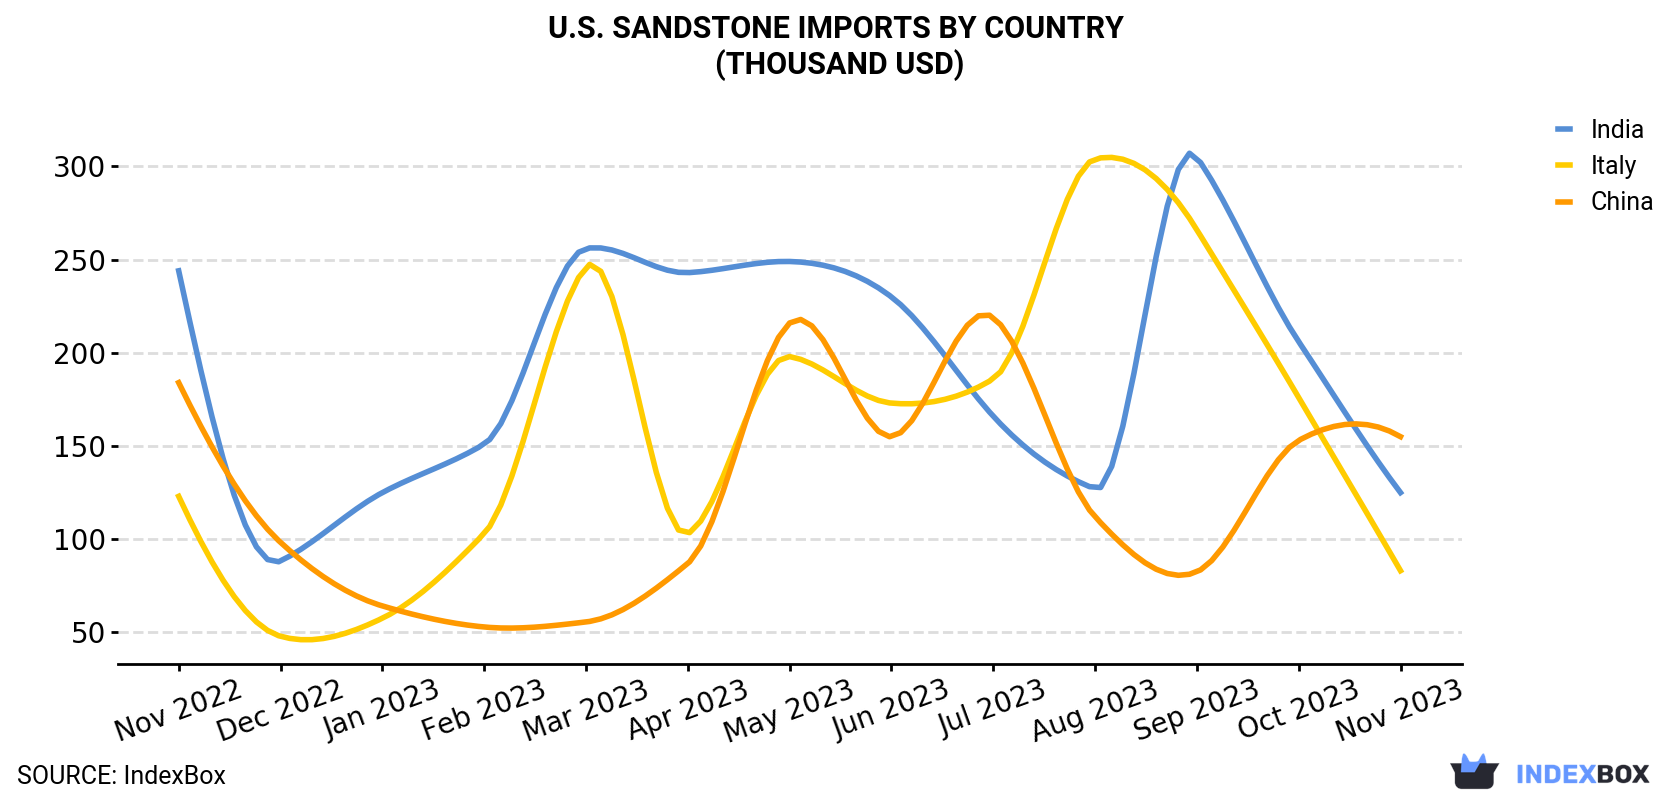 U.S. Sandstone Imports By Country (Thousand USD)